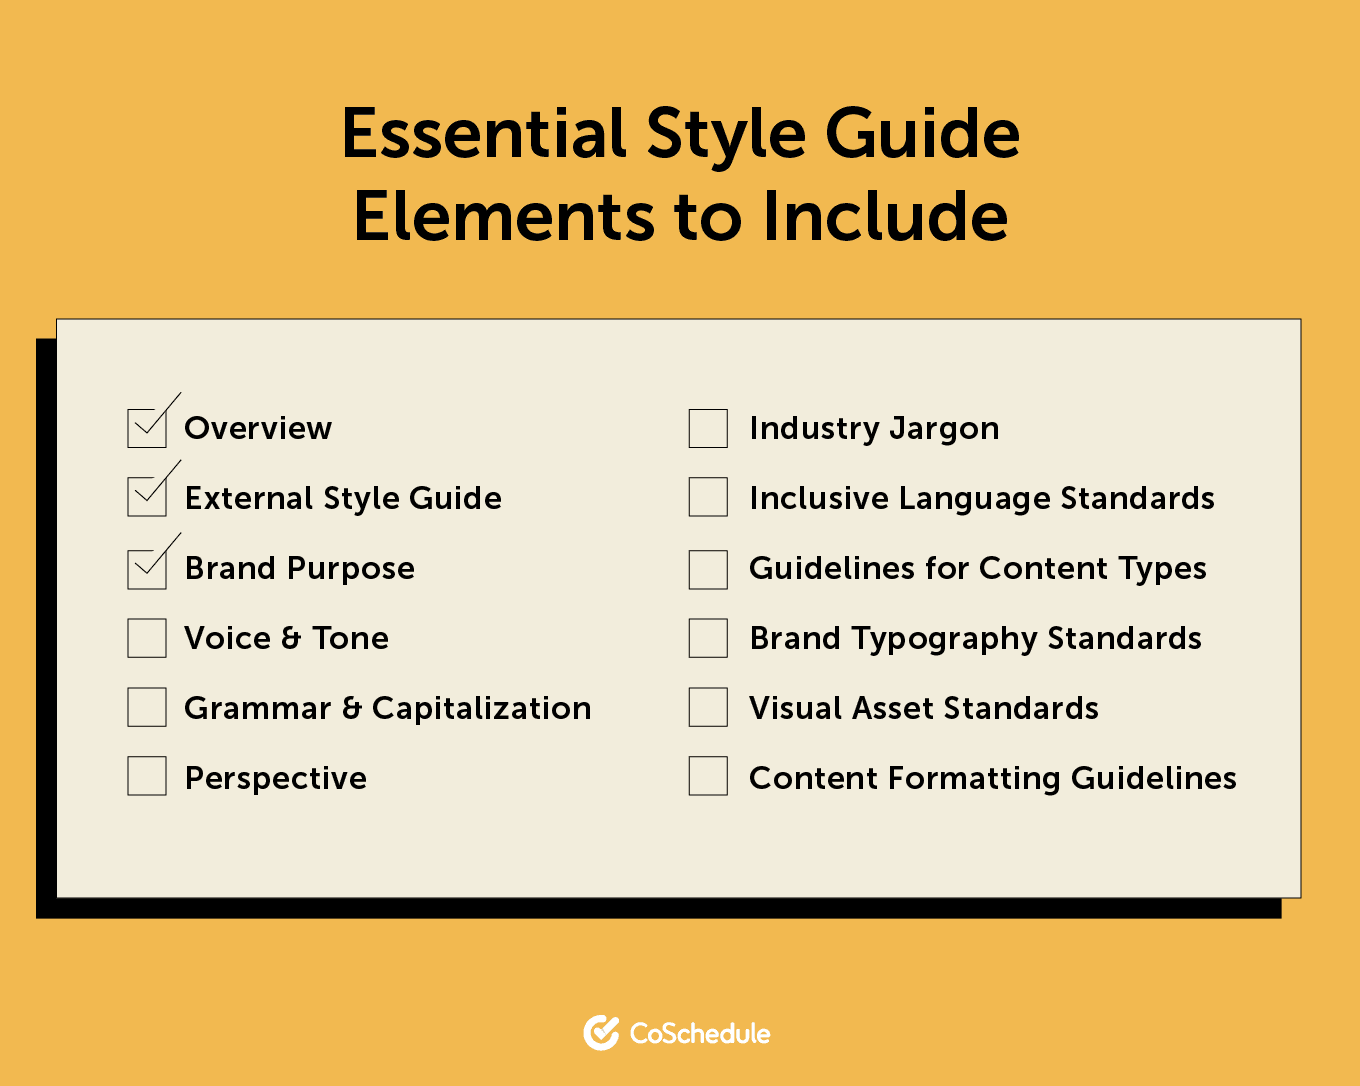 Essential elements to include in a style guide